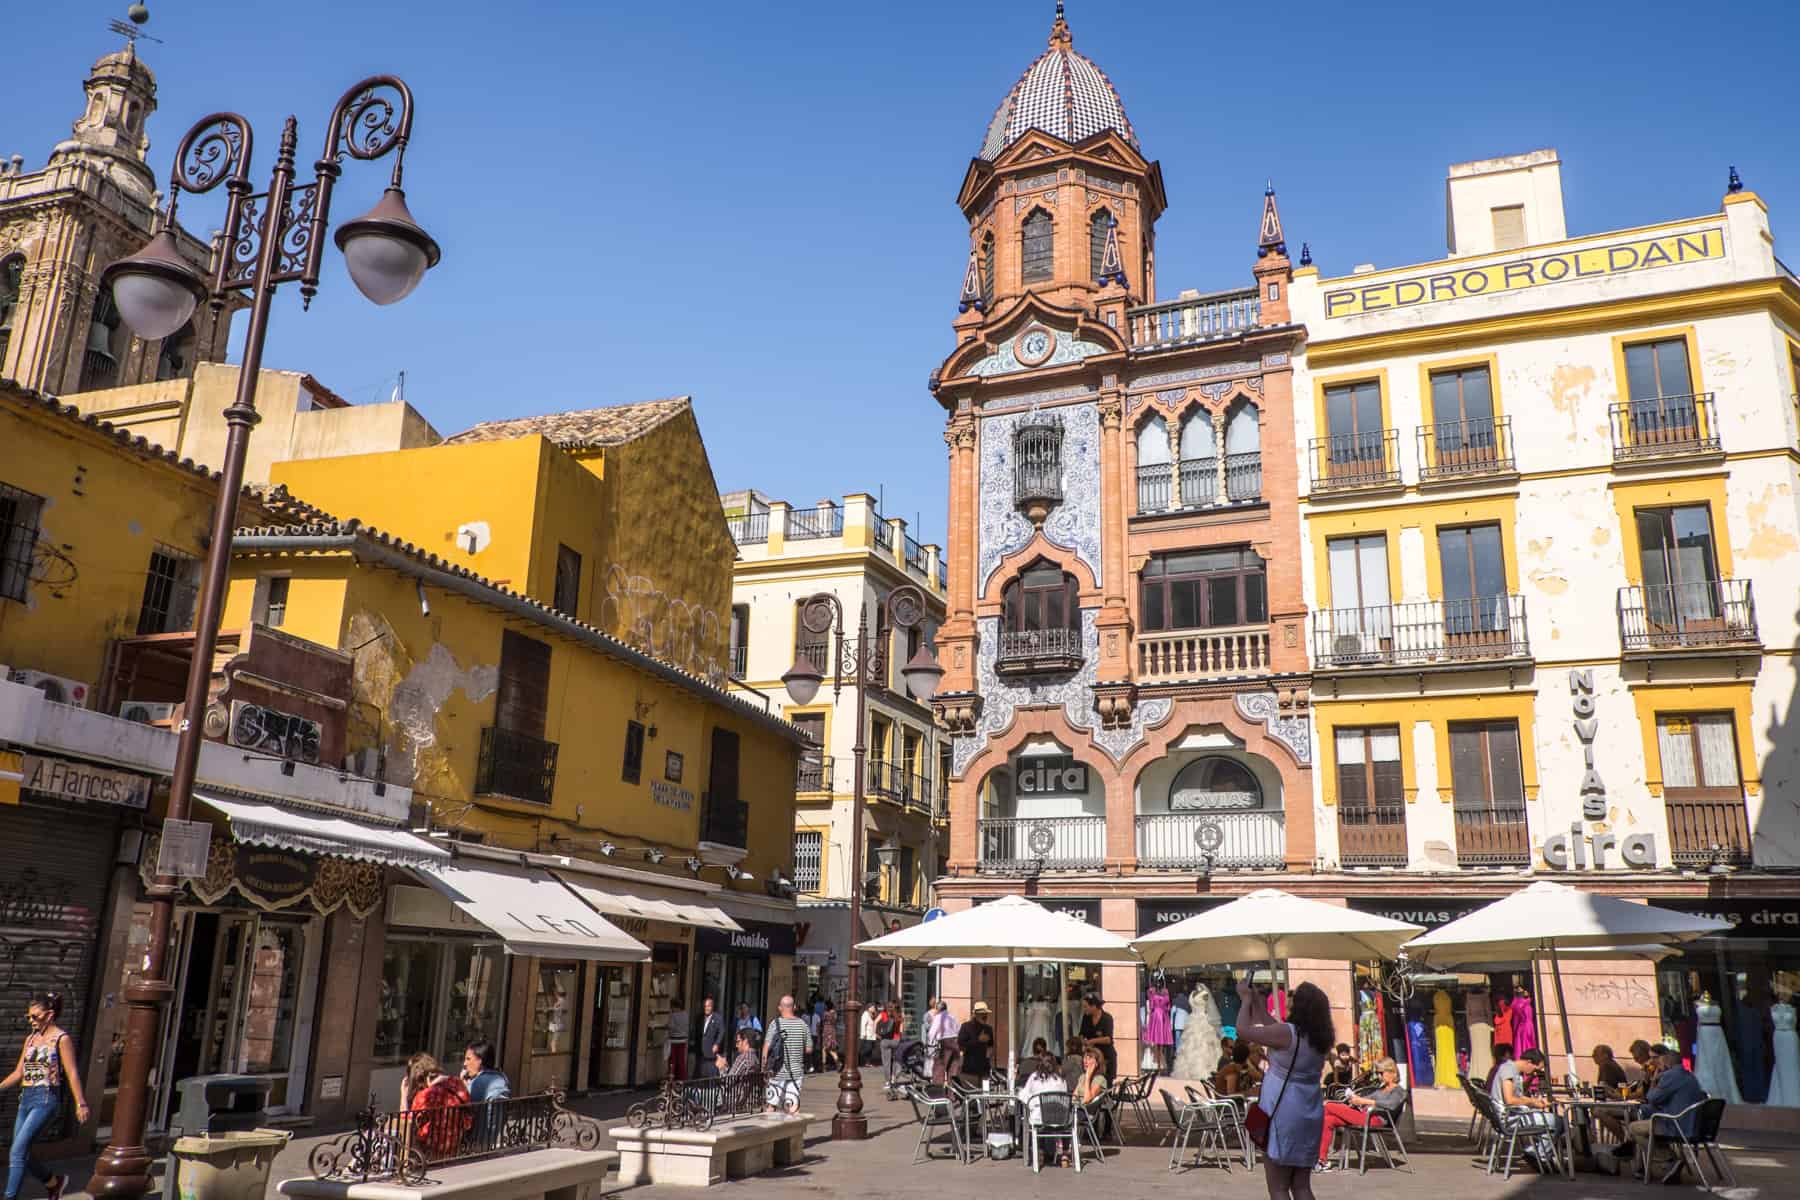 People in a public square in Seville Spain filled with buildings painted bright yellow and vivid salmon pink, vivid in the strong sunlight.